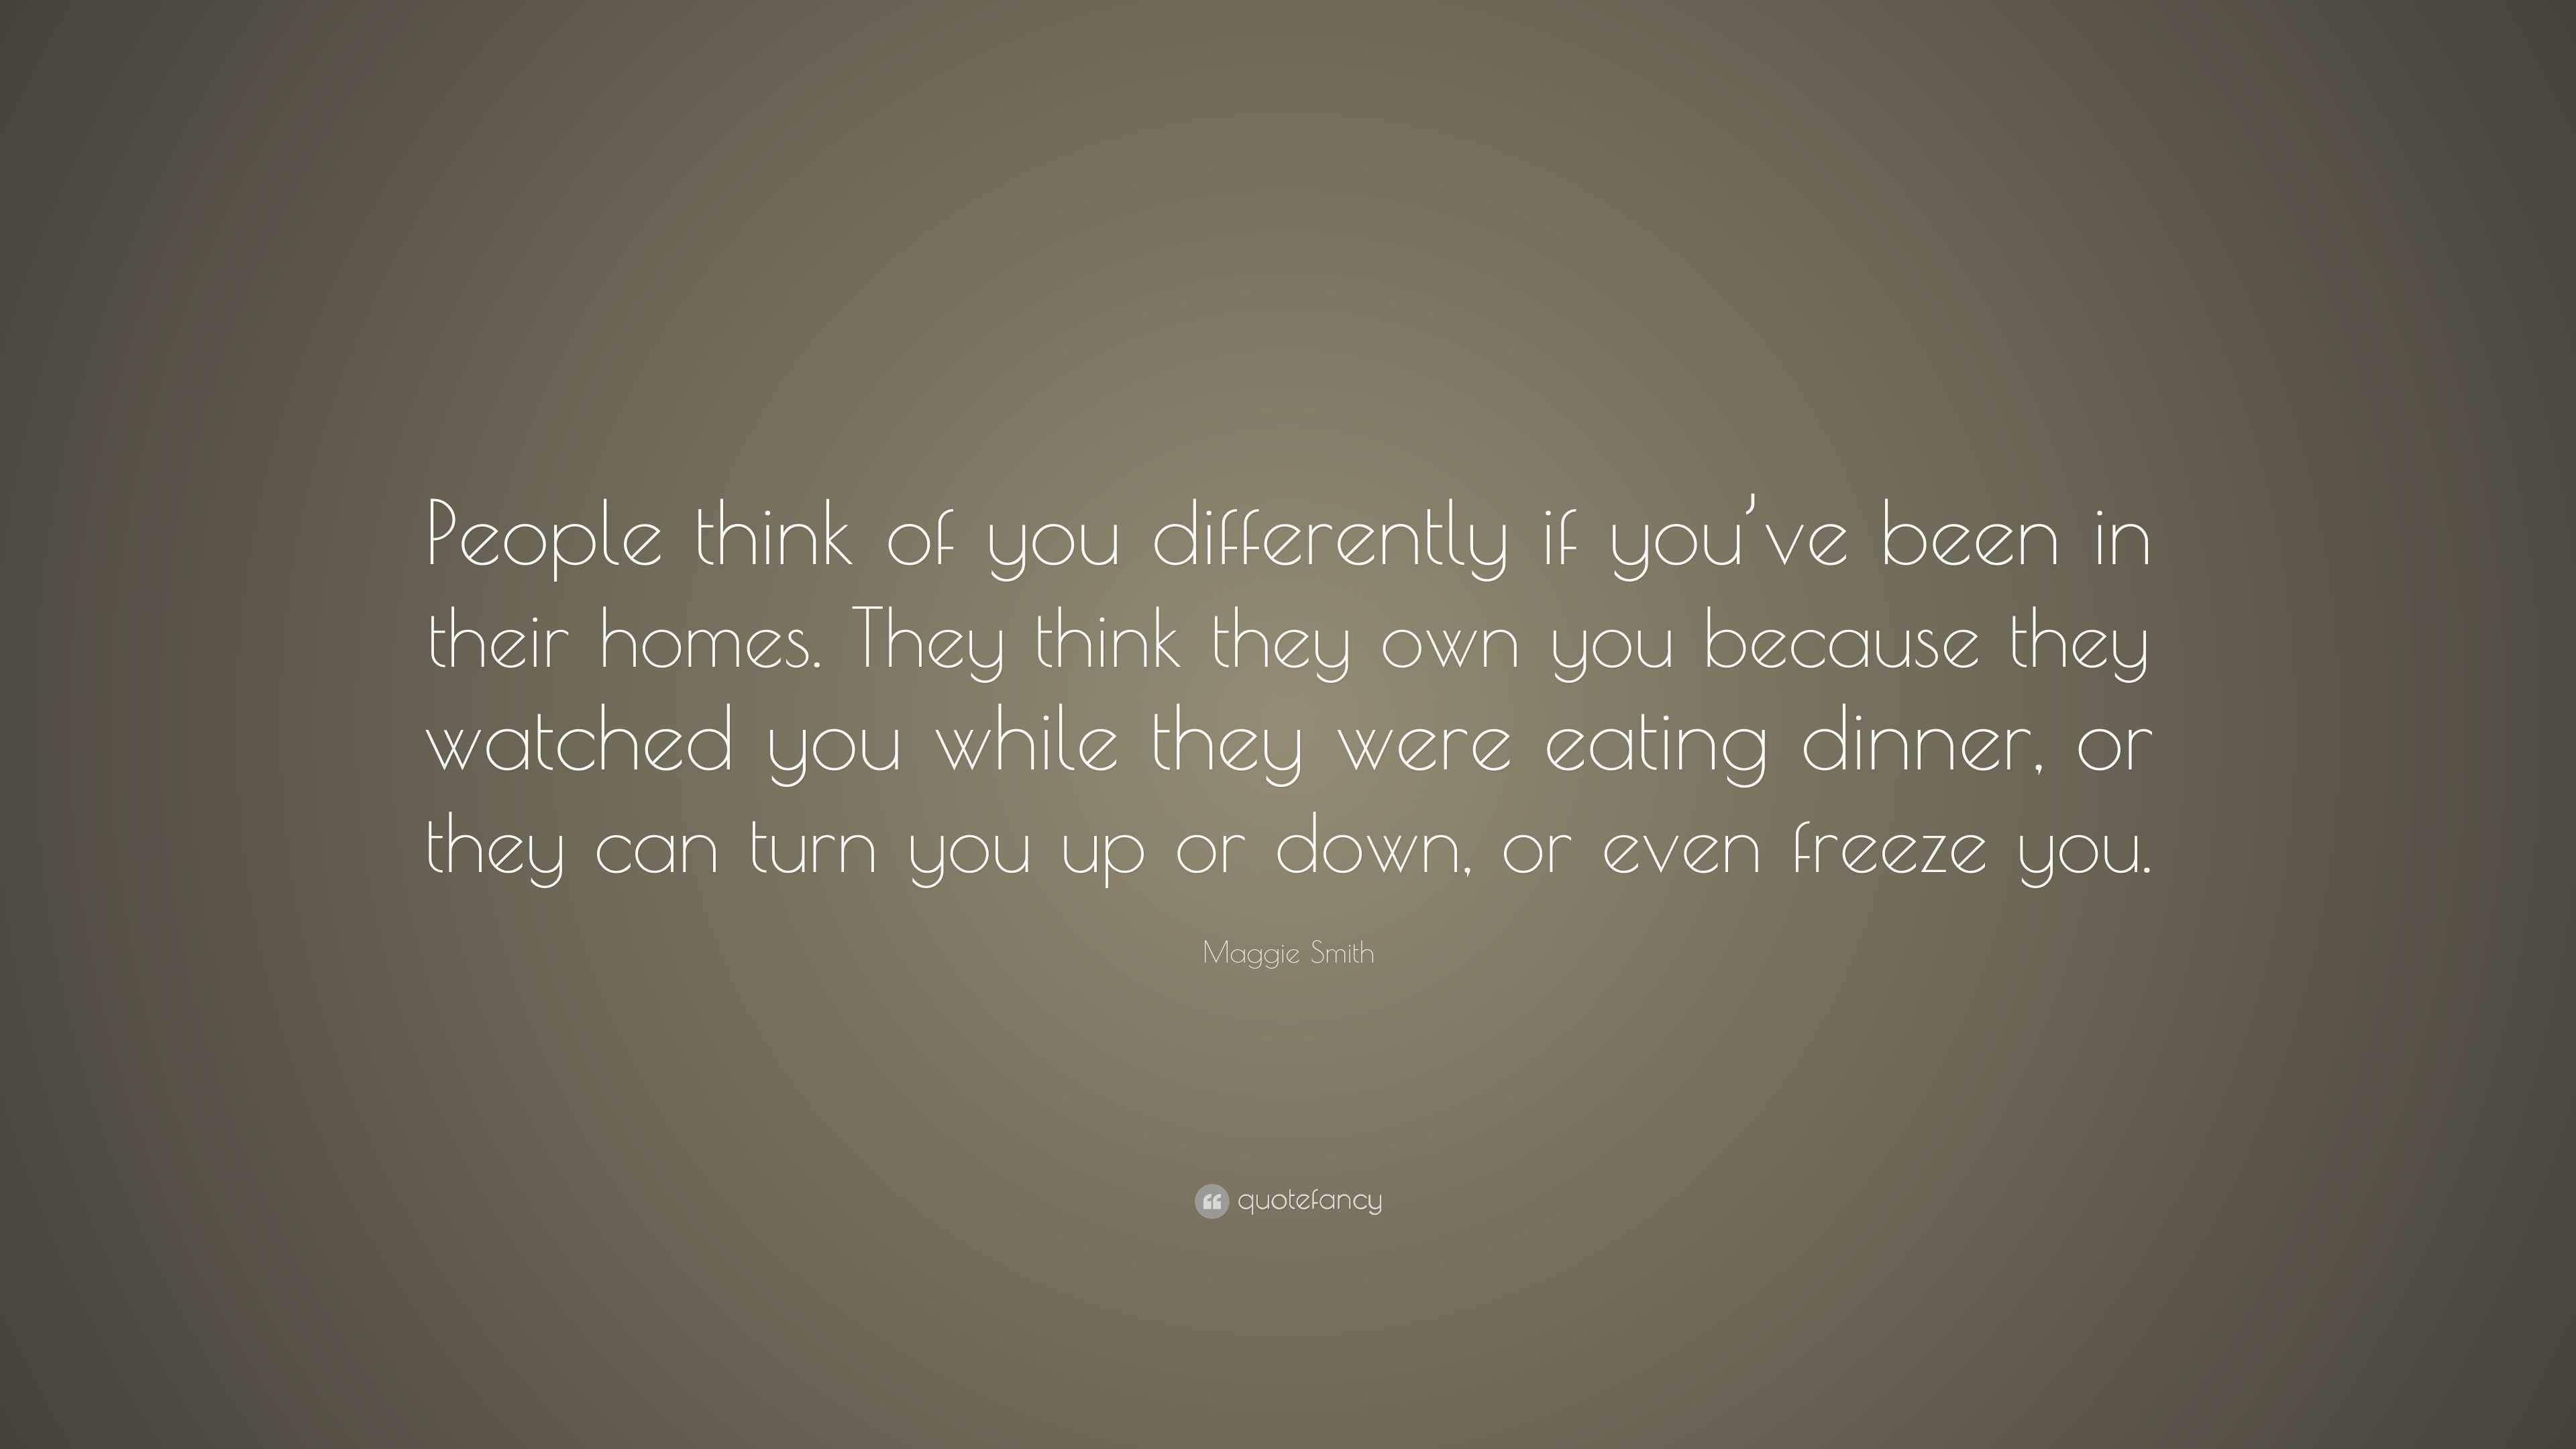 Maggie Smith Quote: “People think of you differently if you’ve been in ...